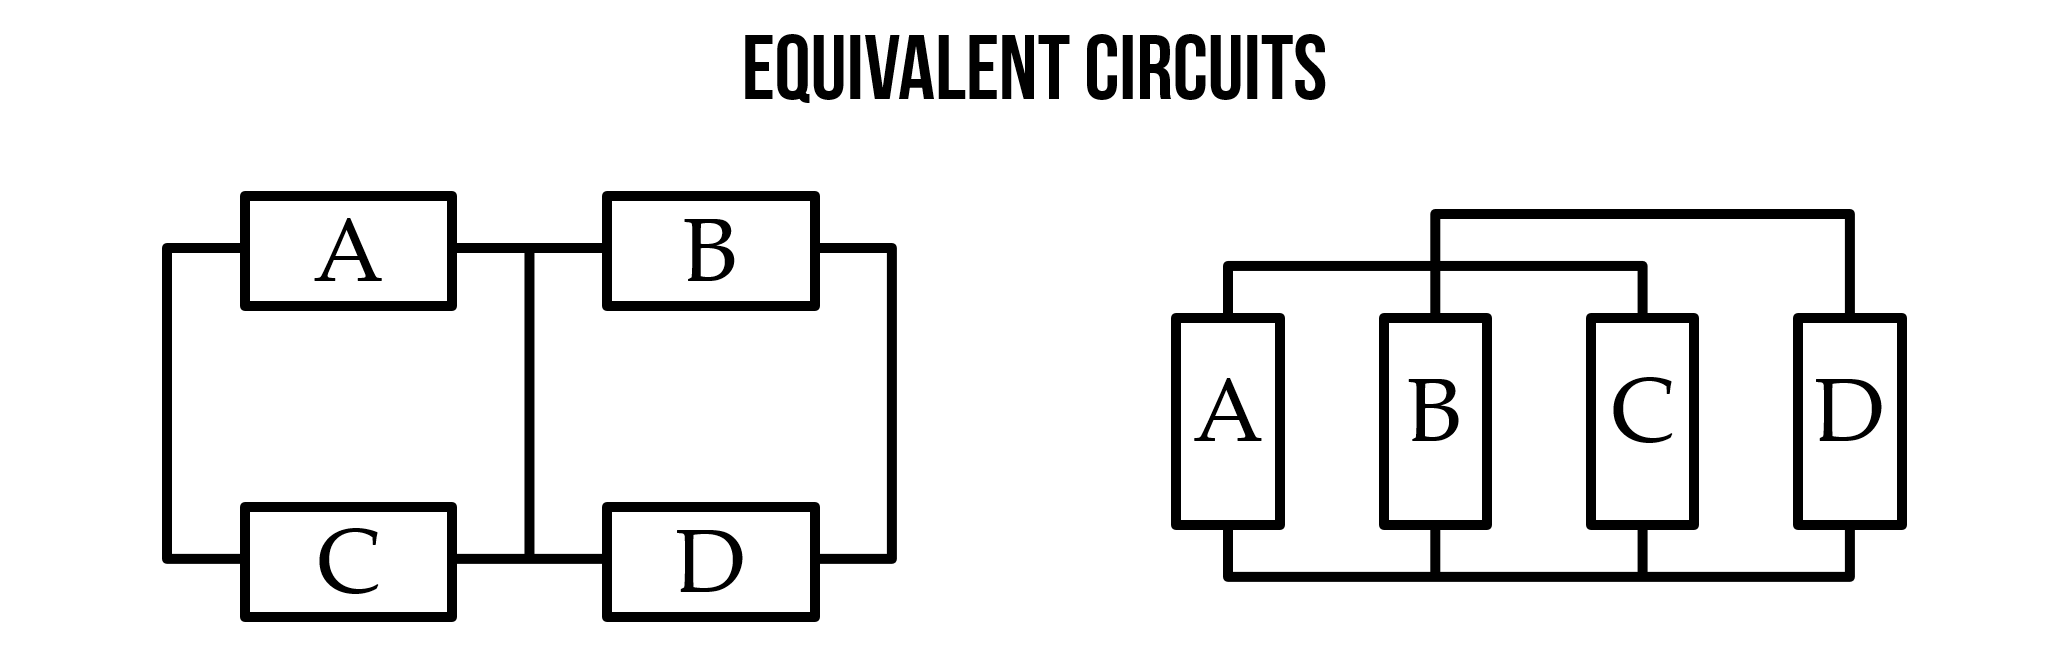 An image of four block elements connected together in a certain arrangement and two equivalent circuit diagrams